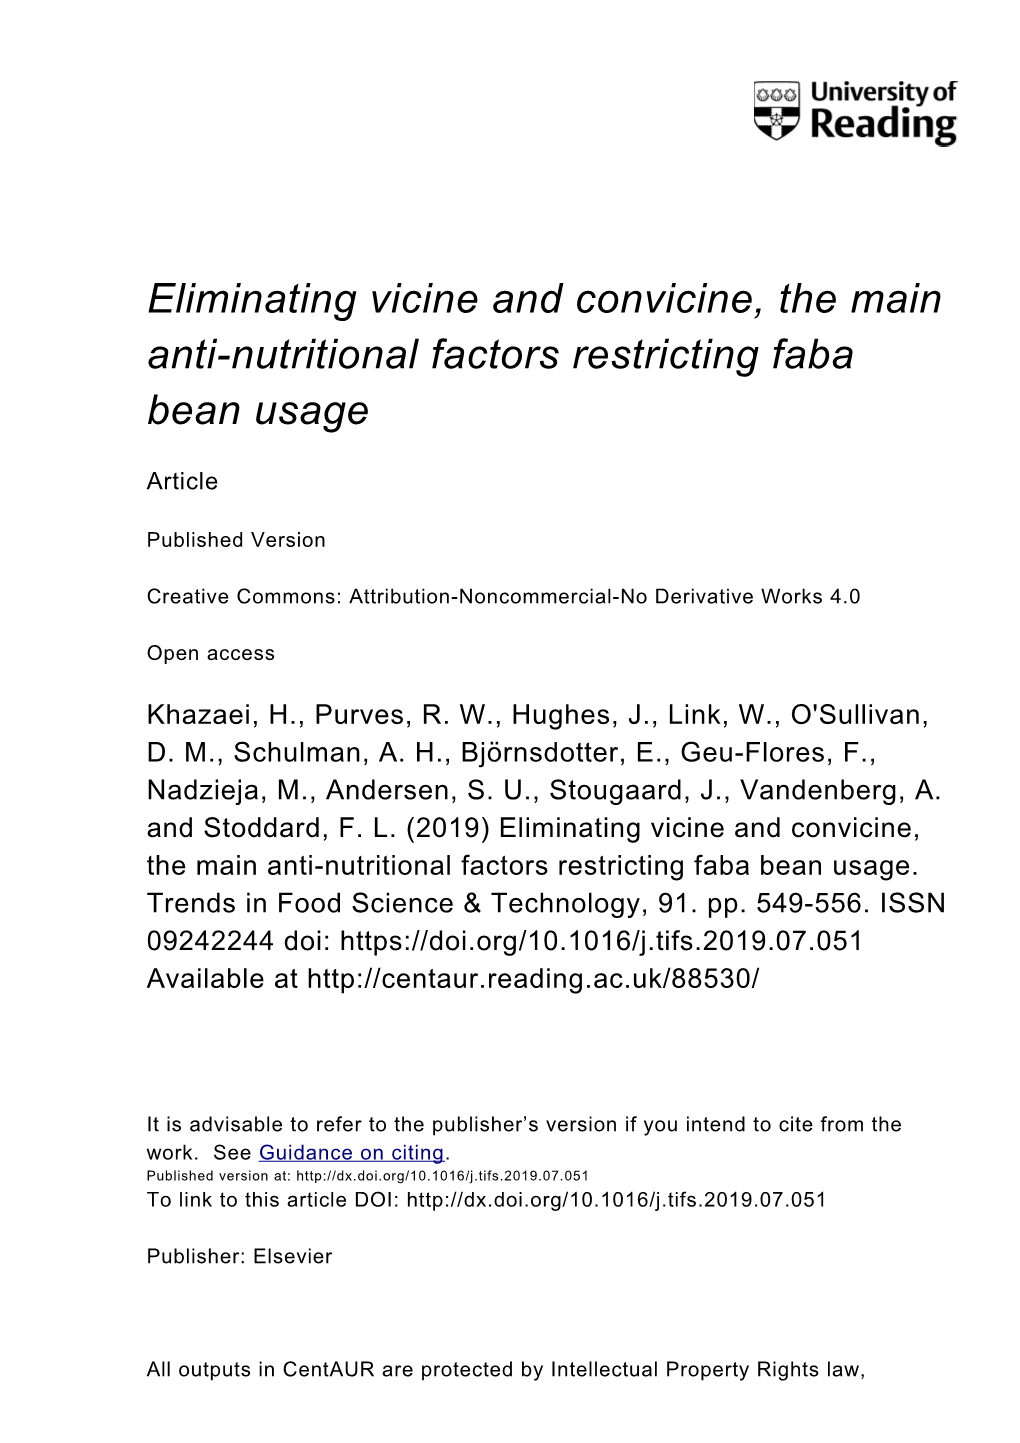 Eliminating Vicine and Convicine, the Main Anti-Nutritional Factors Restricting Faba Bean Usage